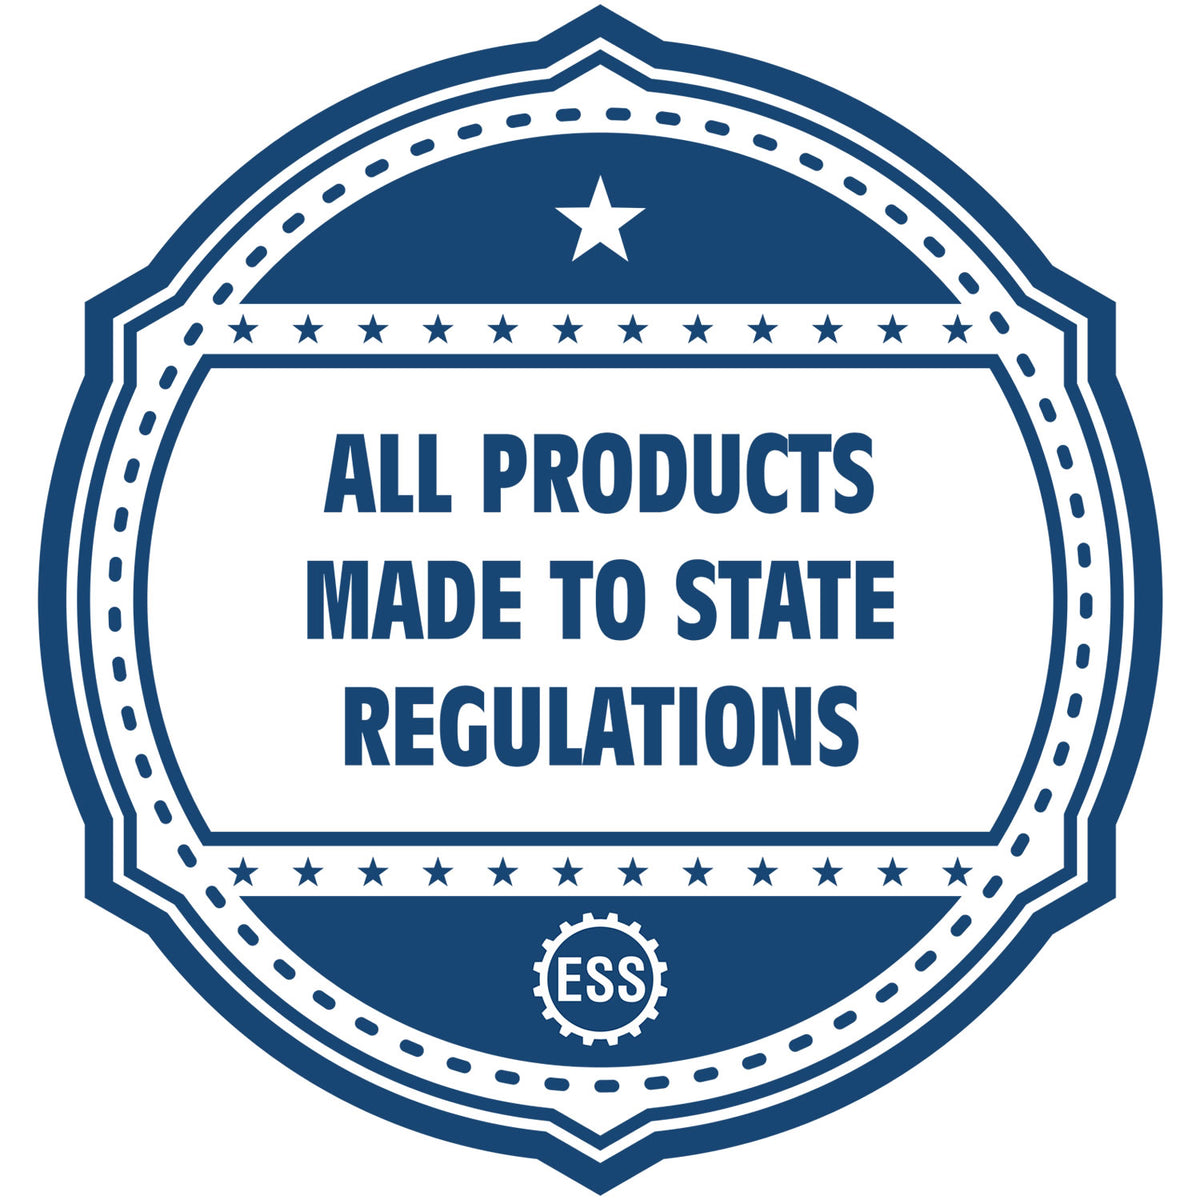 An icon or badge element for the Soft Ohio Professional Engineer Seal showing that this product is made in compliance with state regulations.